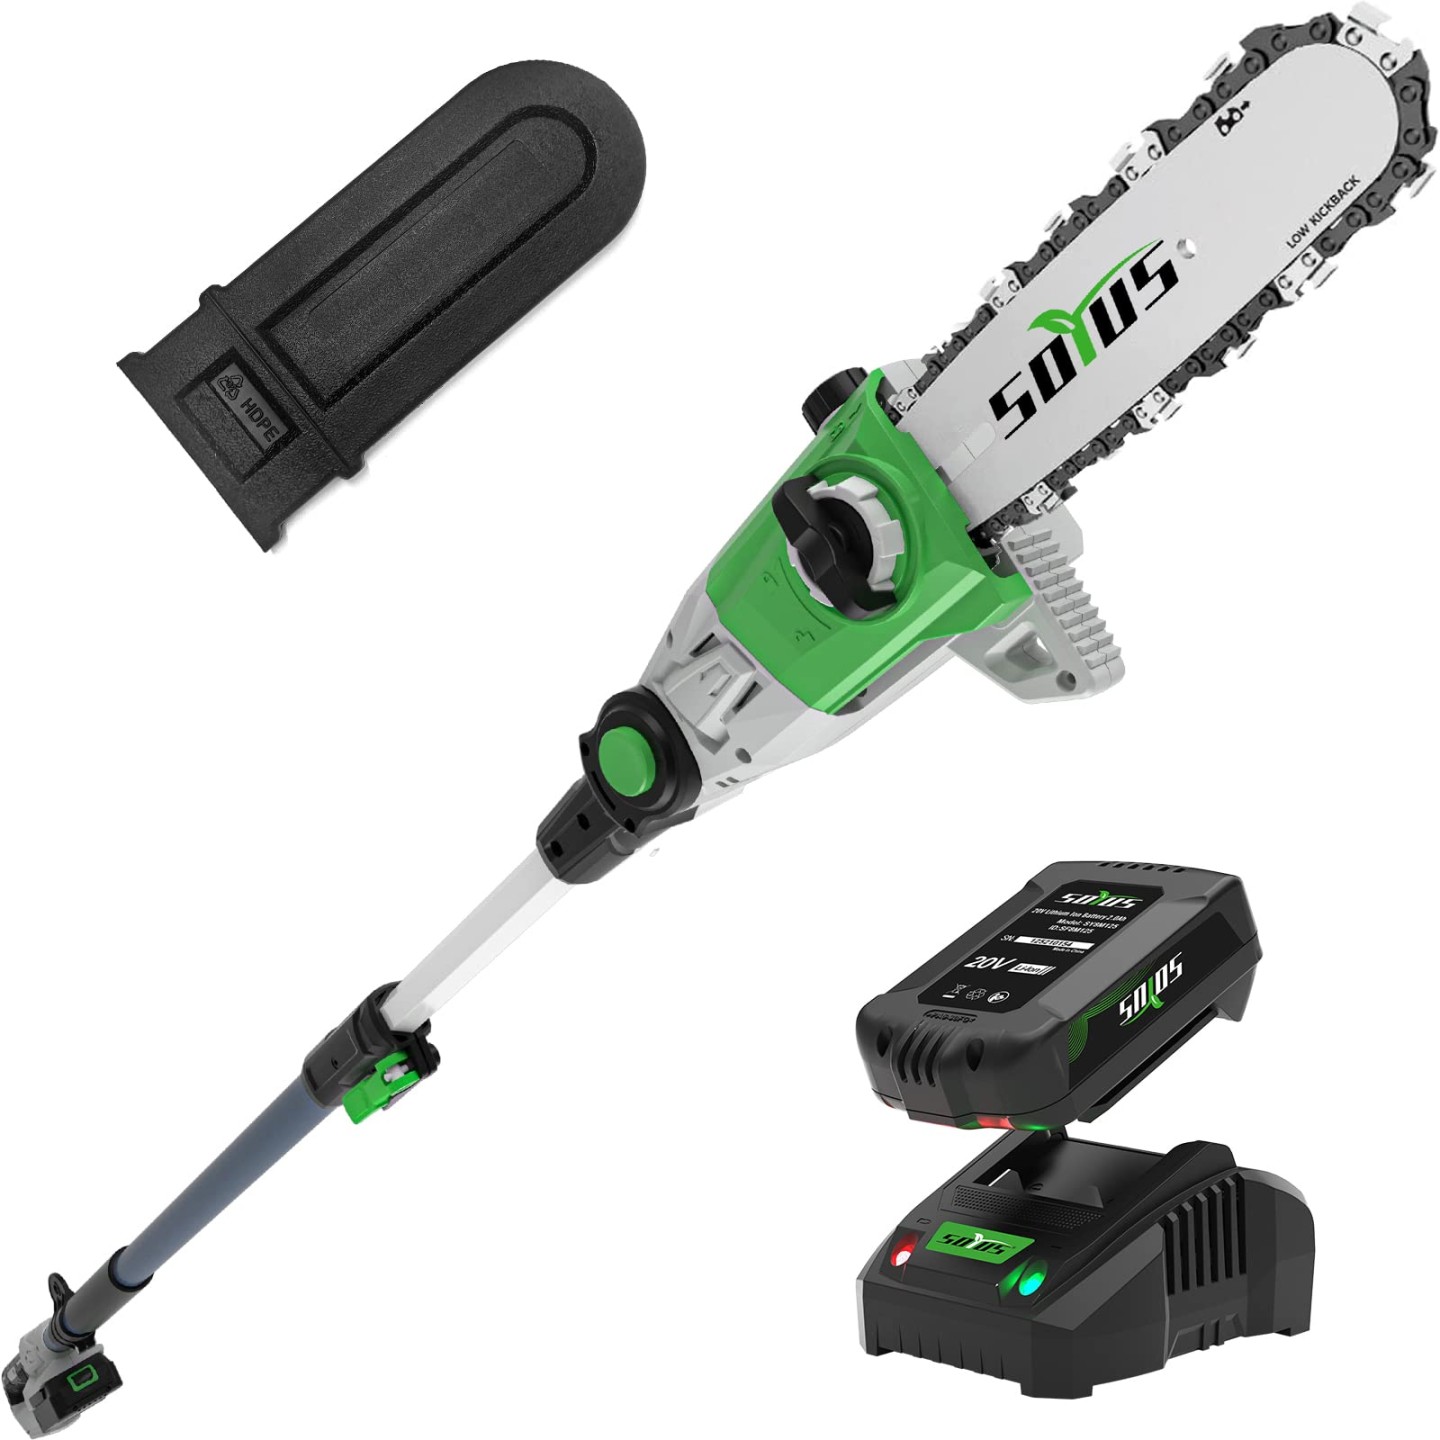 soyus-cordless-pole-saw-telescoping-electric-pole-chain-saw-auto-oiling-ah-battery-multi-angle-pole-chainsaw-for-branch-cutting-amp-tree-trimming Pole Saw Battery Review: Choosing the Right Power Source for Your Needs picture